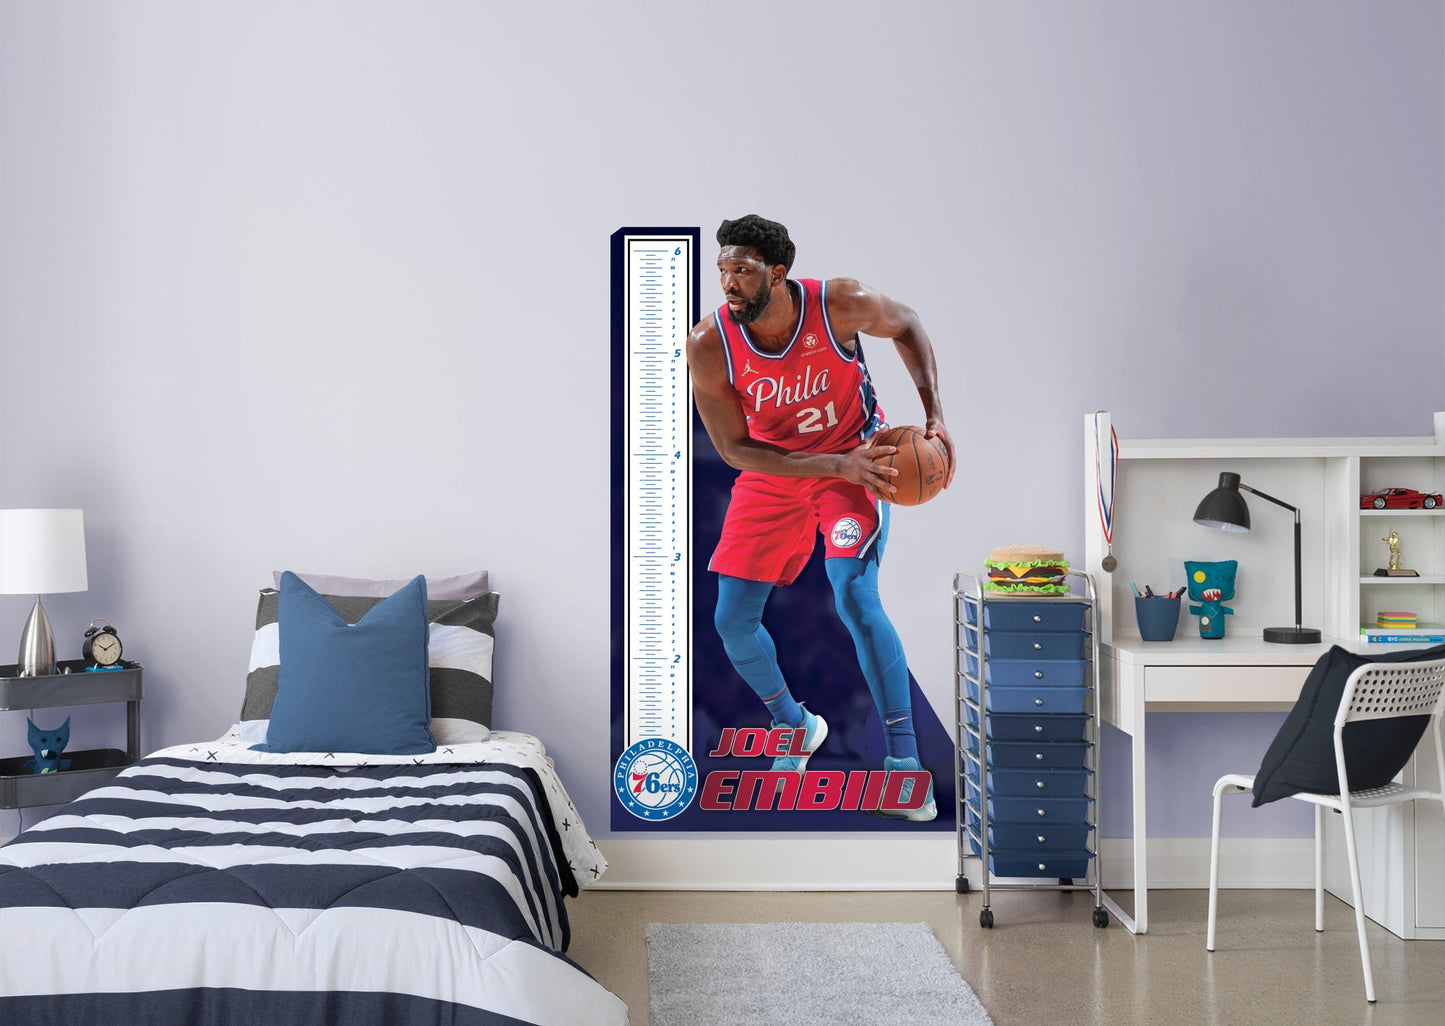 Philadelphia 76ers: Joel Embiid Growth Chart - Officially Licensed NBA Removable Adhesive Decal